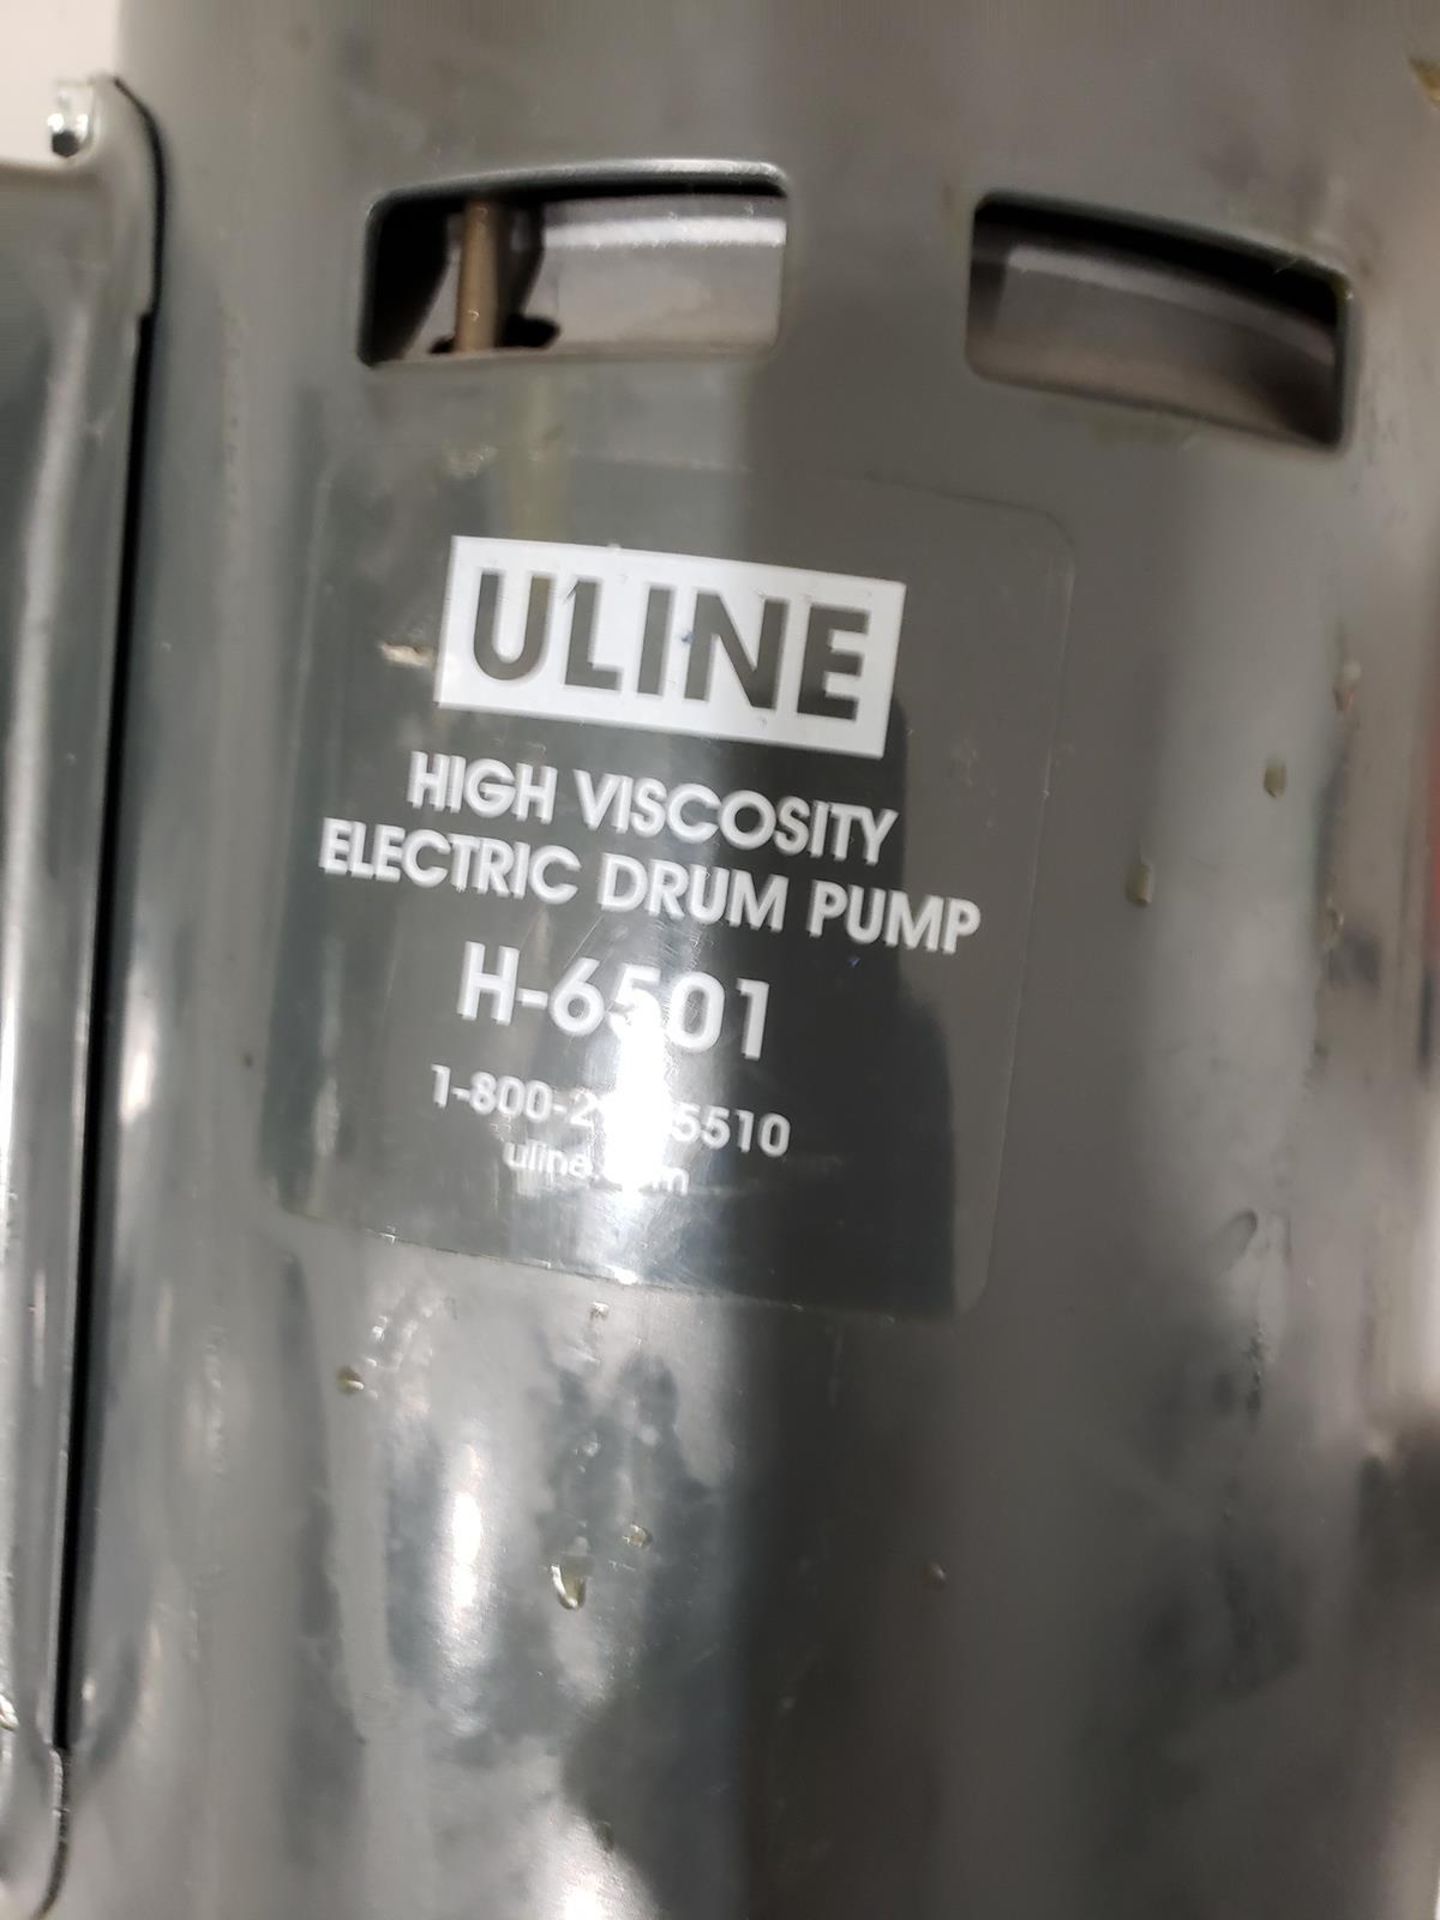 Lot of (2) Uline High Viscosity Electric Drum Pumps, M# H-6501 | Rig Fee $25 - Image 2 of 2